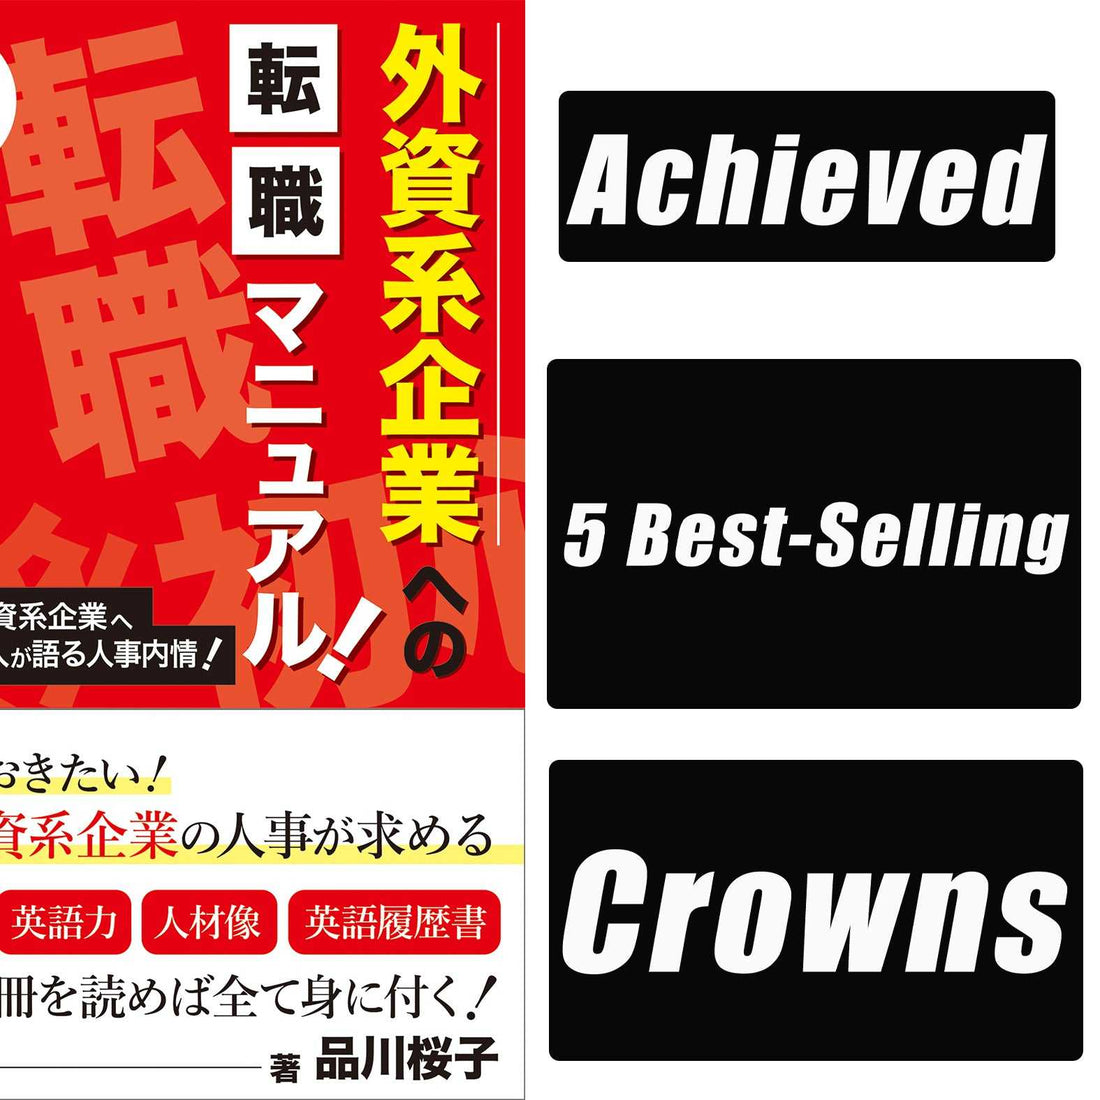 Report: Achieved 5 best-selling crowns on the Kindle store!